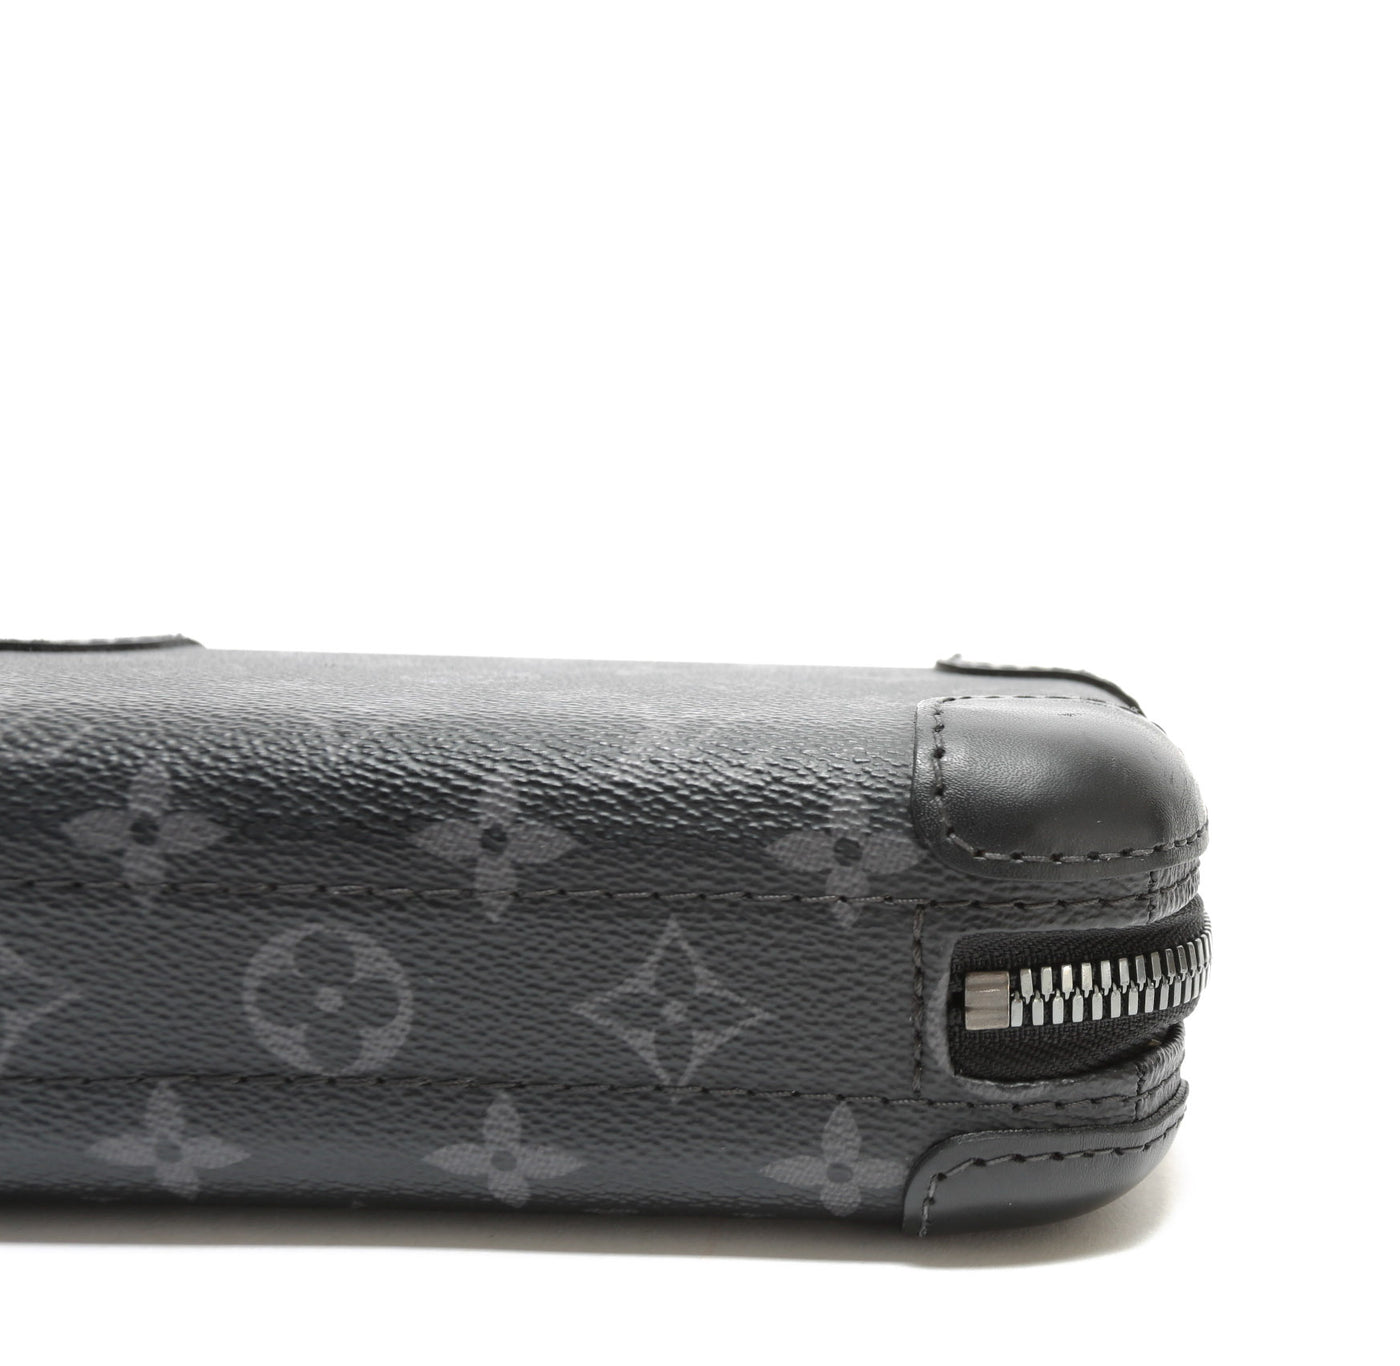 Louis Vuitton's new Horizon Clutch is made from Monogram Eclipse